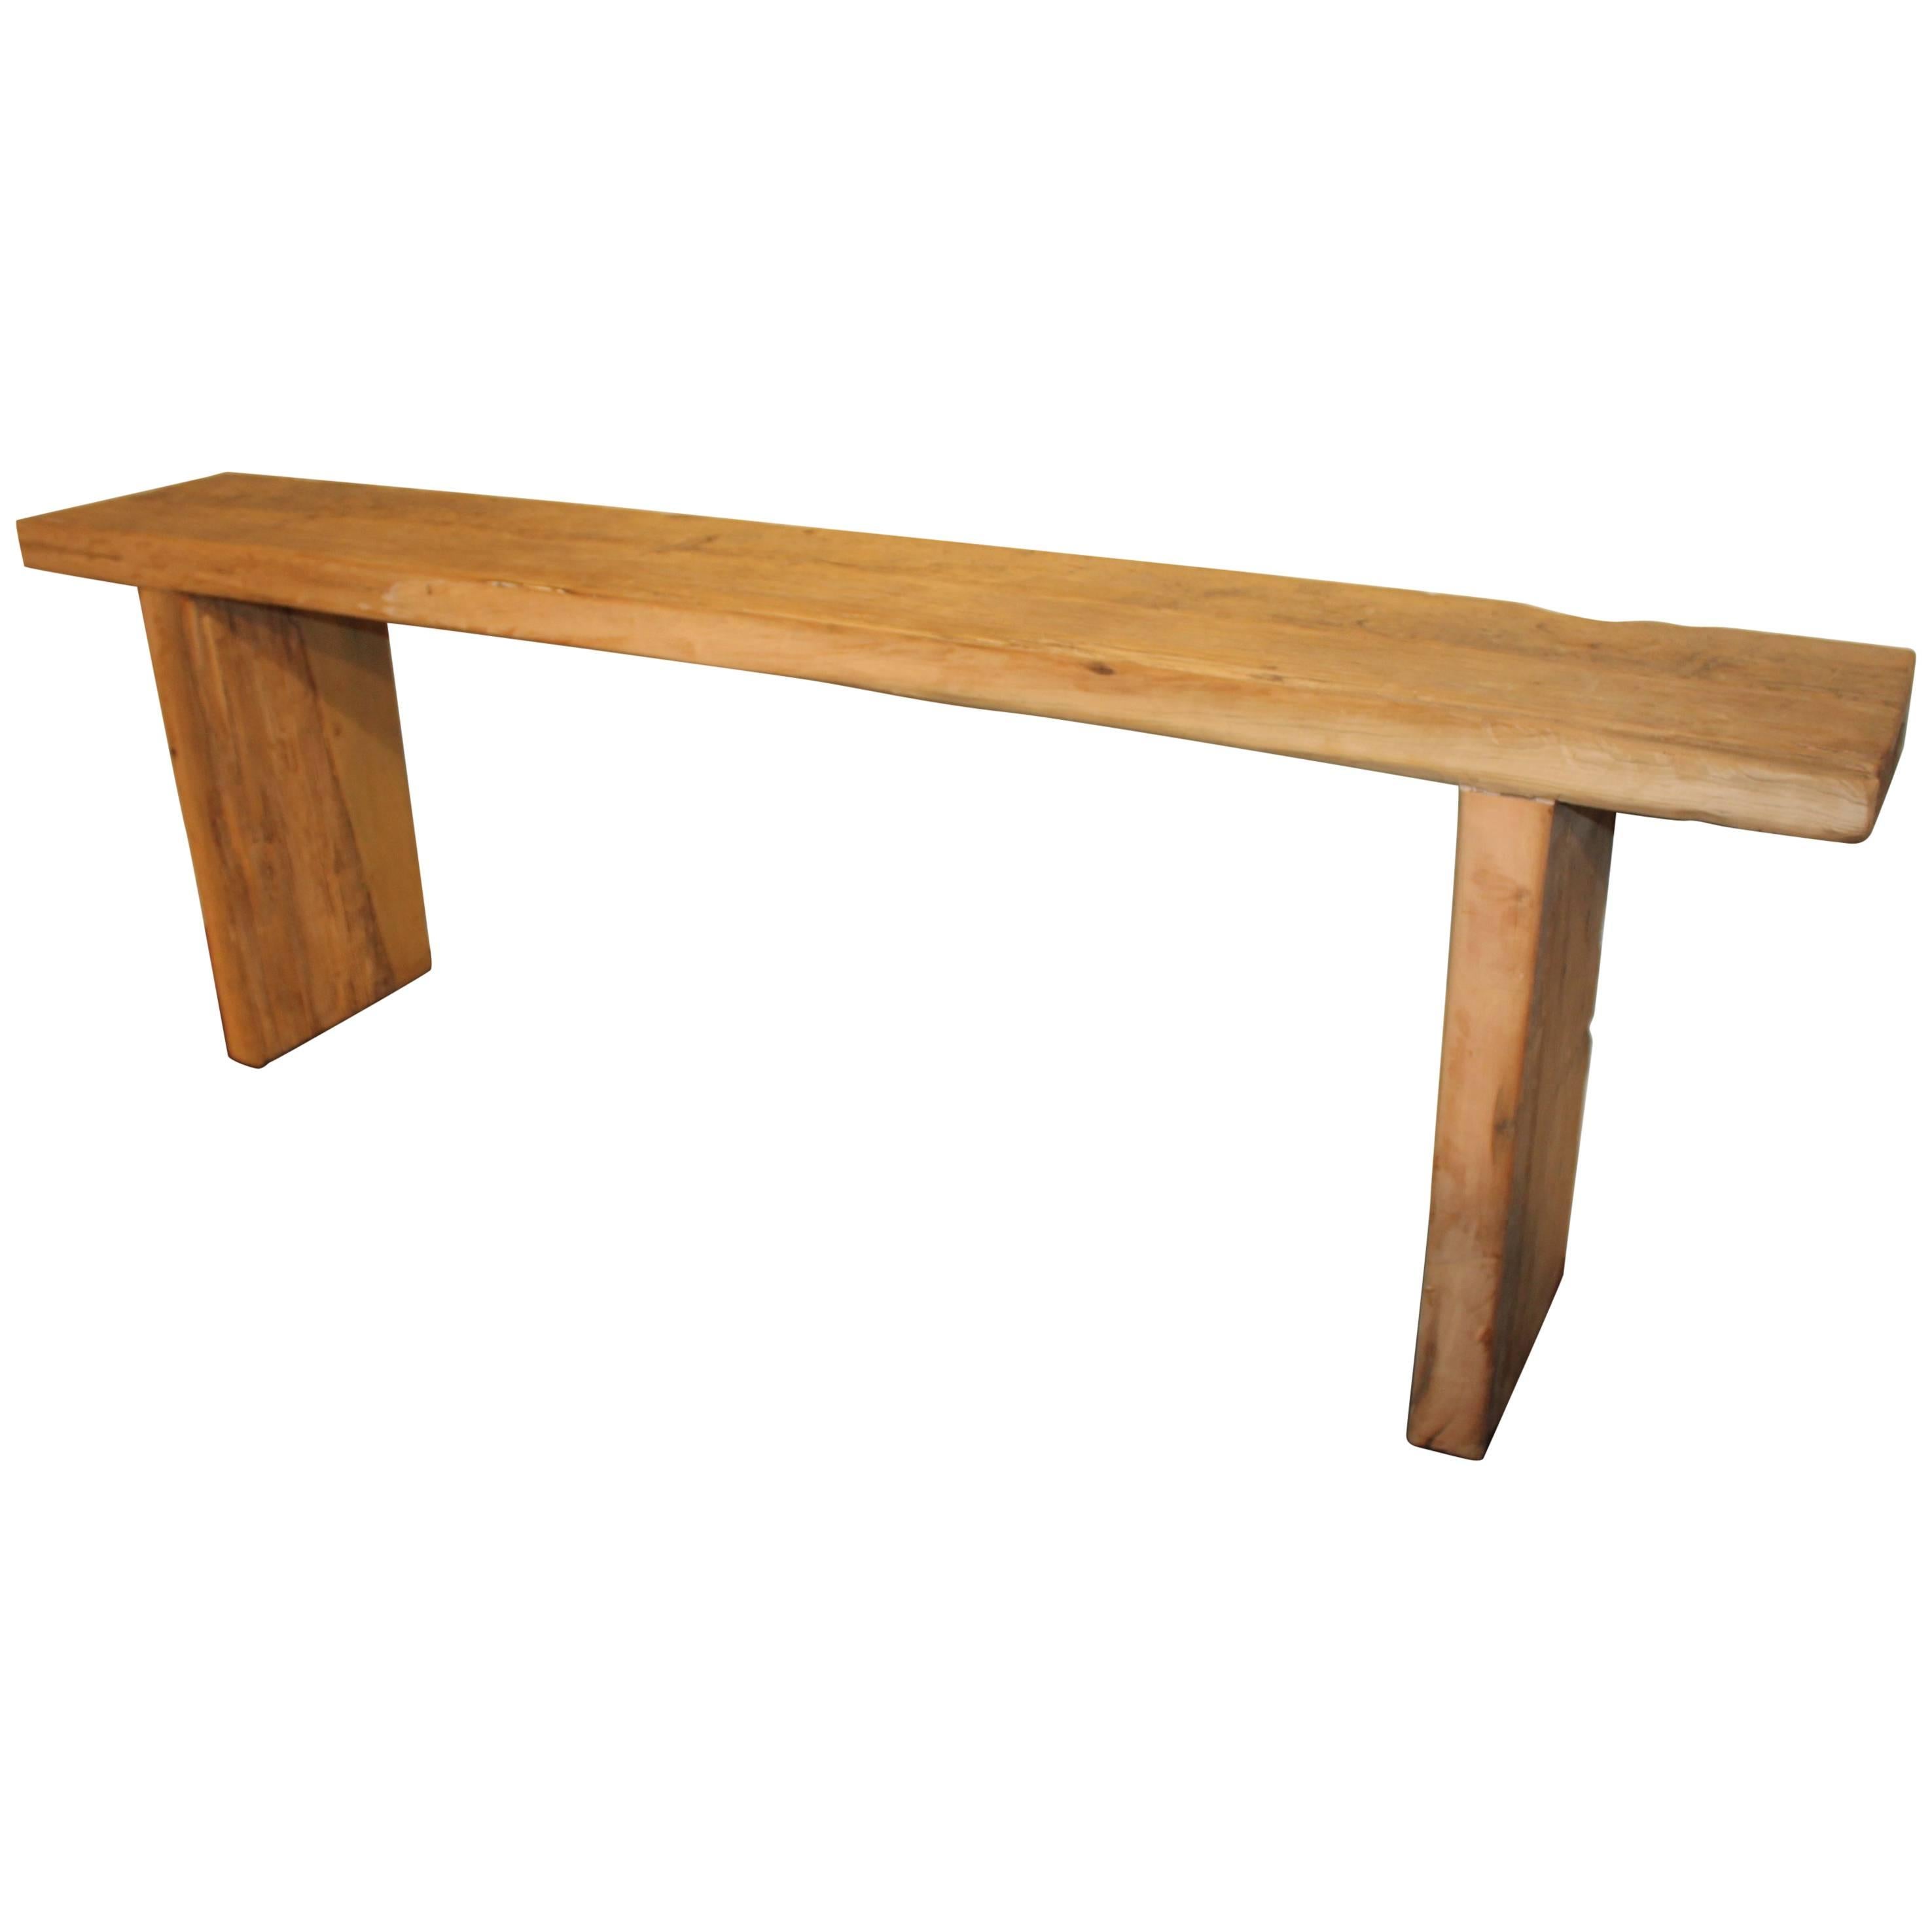 Console table crafted from reclaimed elm.